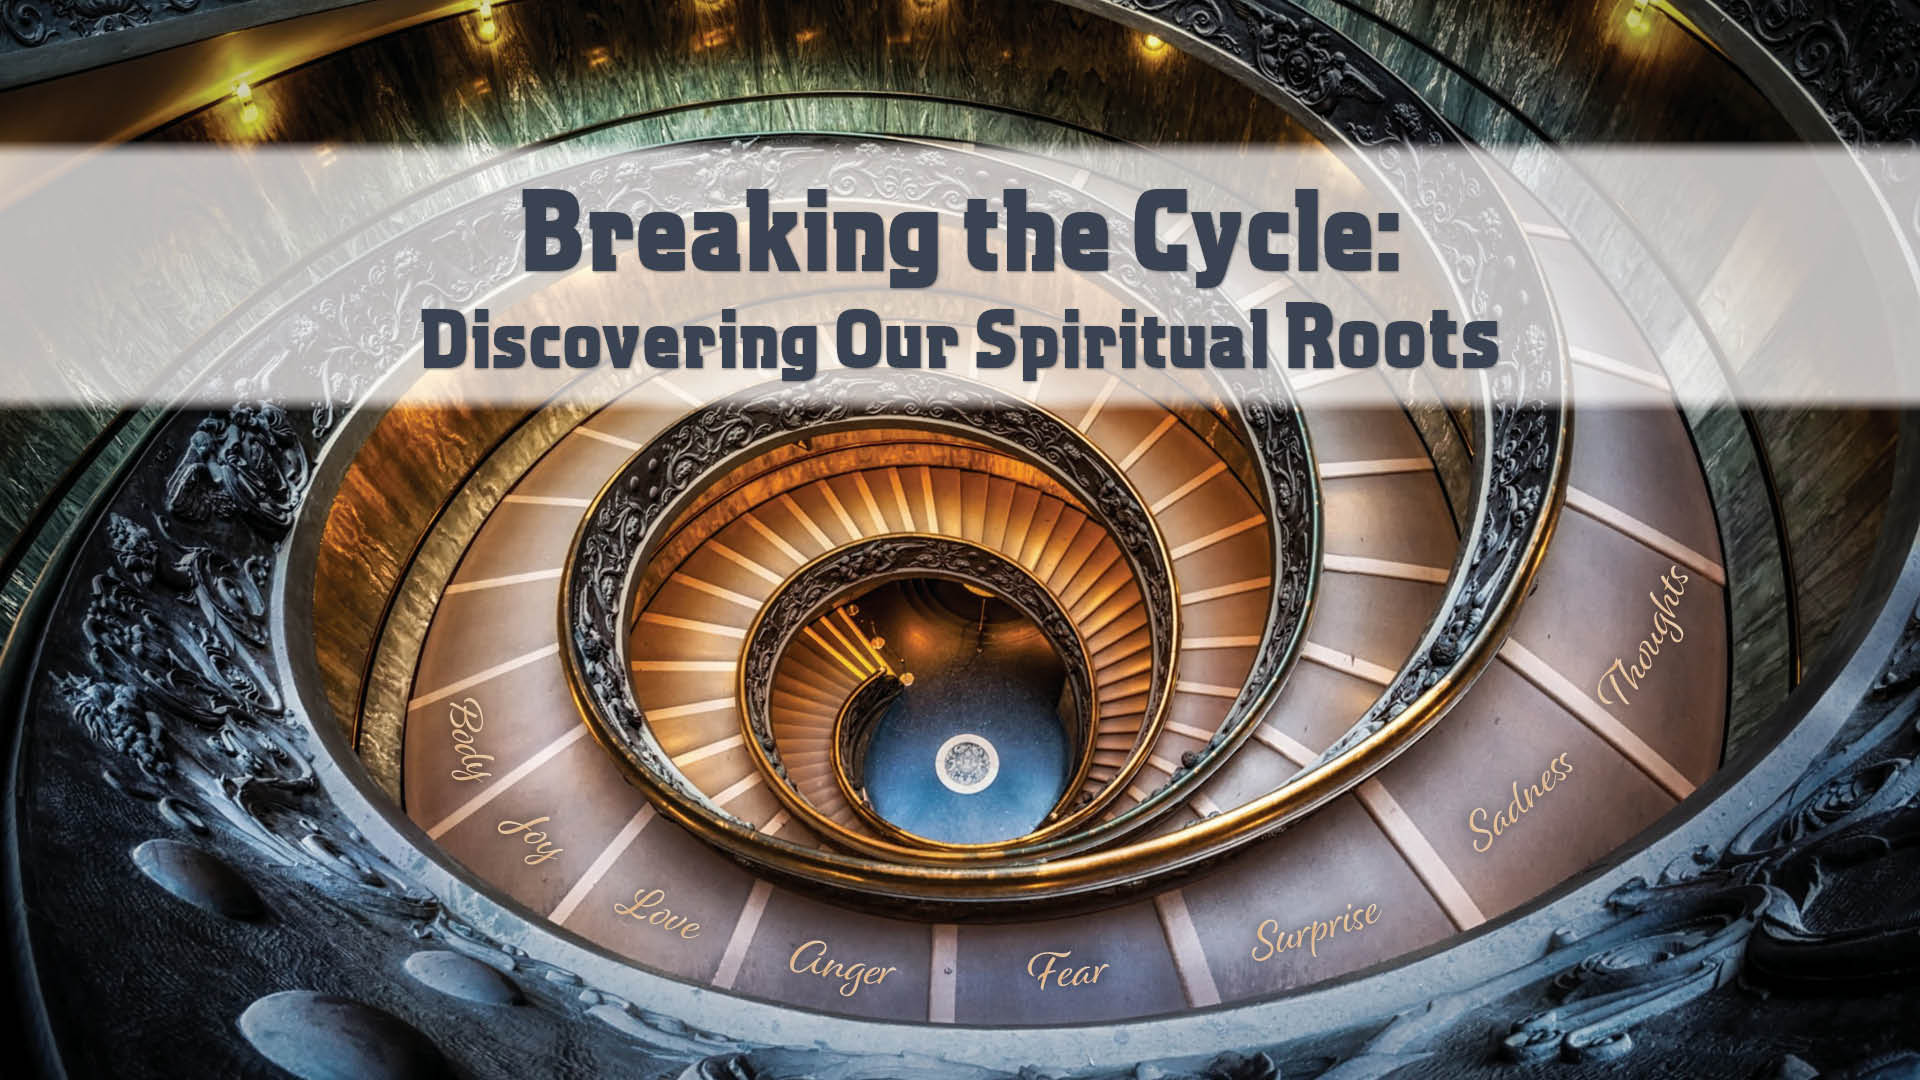 Breaking the Cycle: Discovering Our Spiritual Roots